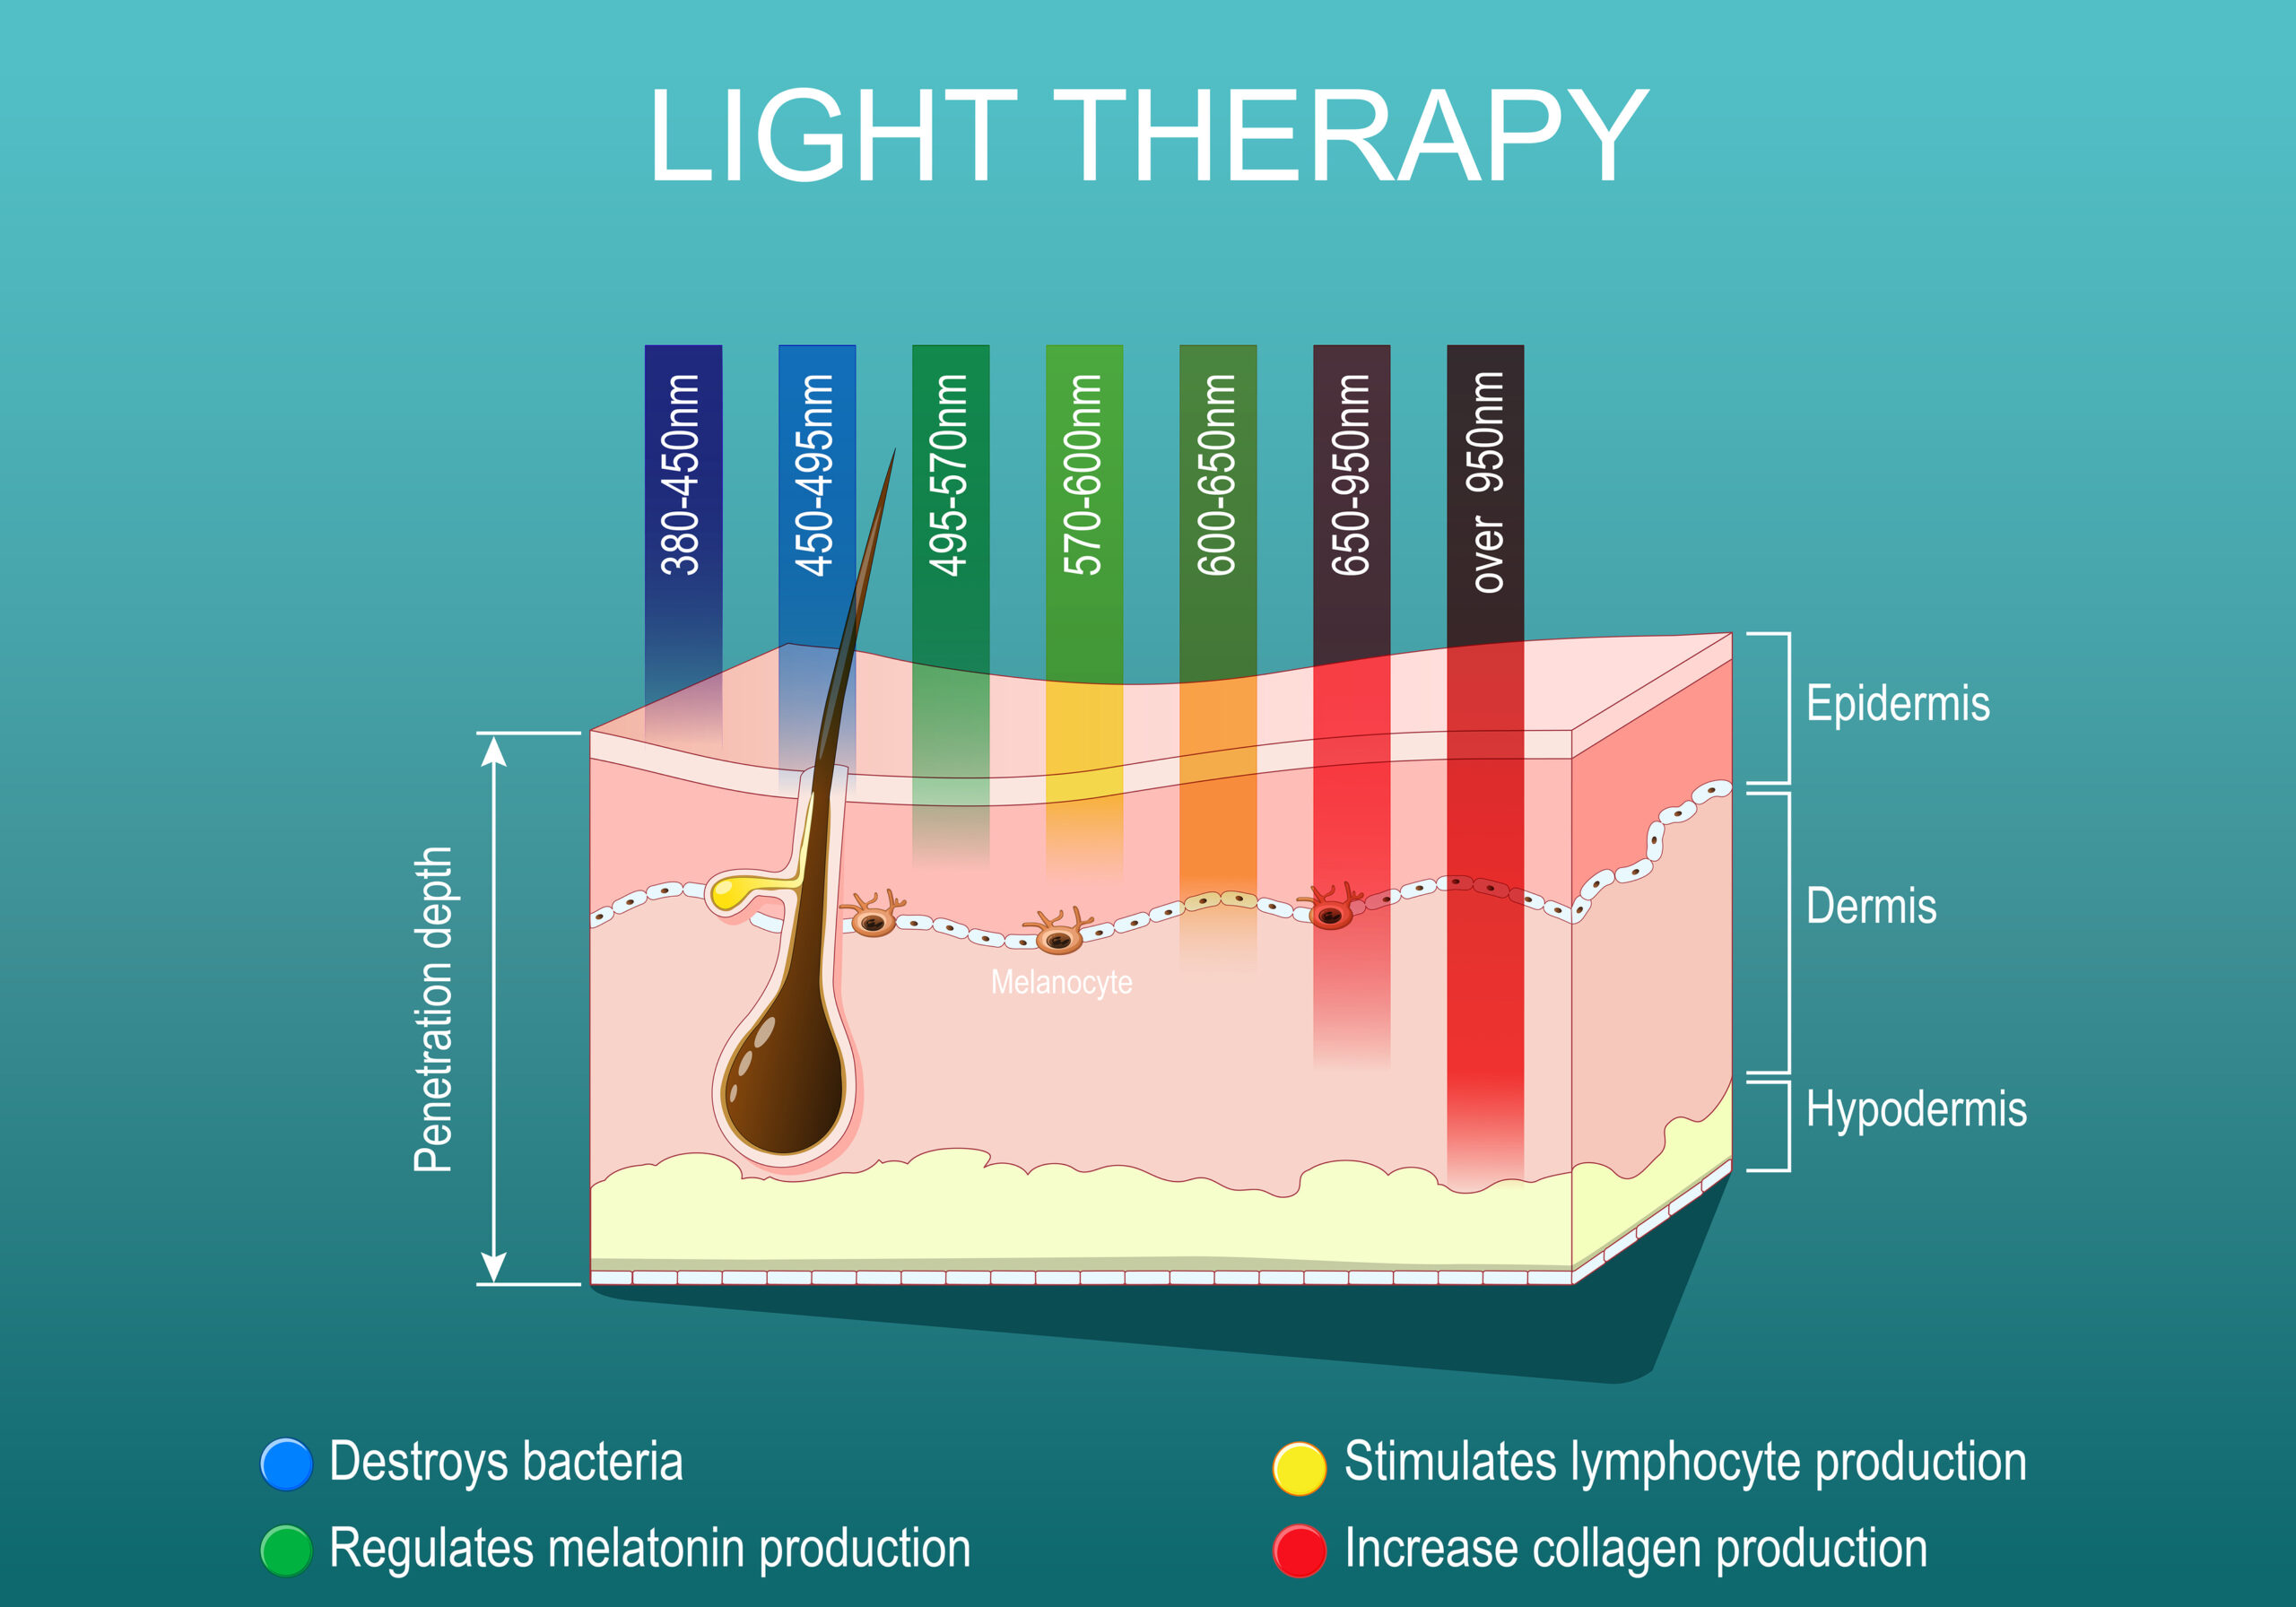 Light therapy for Skin rejuvenation. Phototherapy or laser therapy. Wrinkle reduction. Electromagnetic spectrum with colors of the various wavelengths in the human skin. isometric flat vector illustration